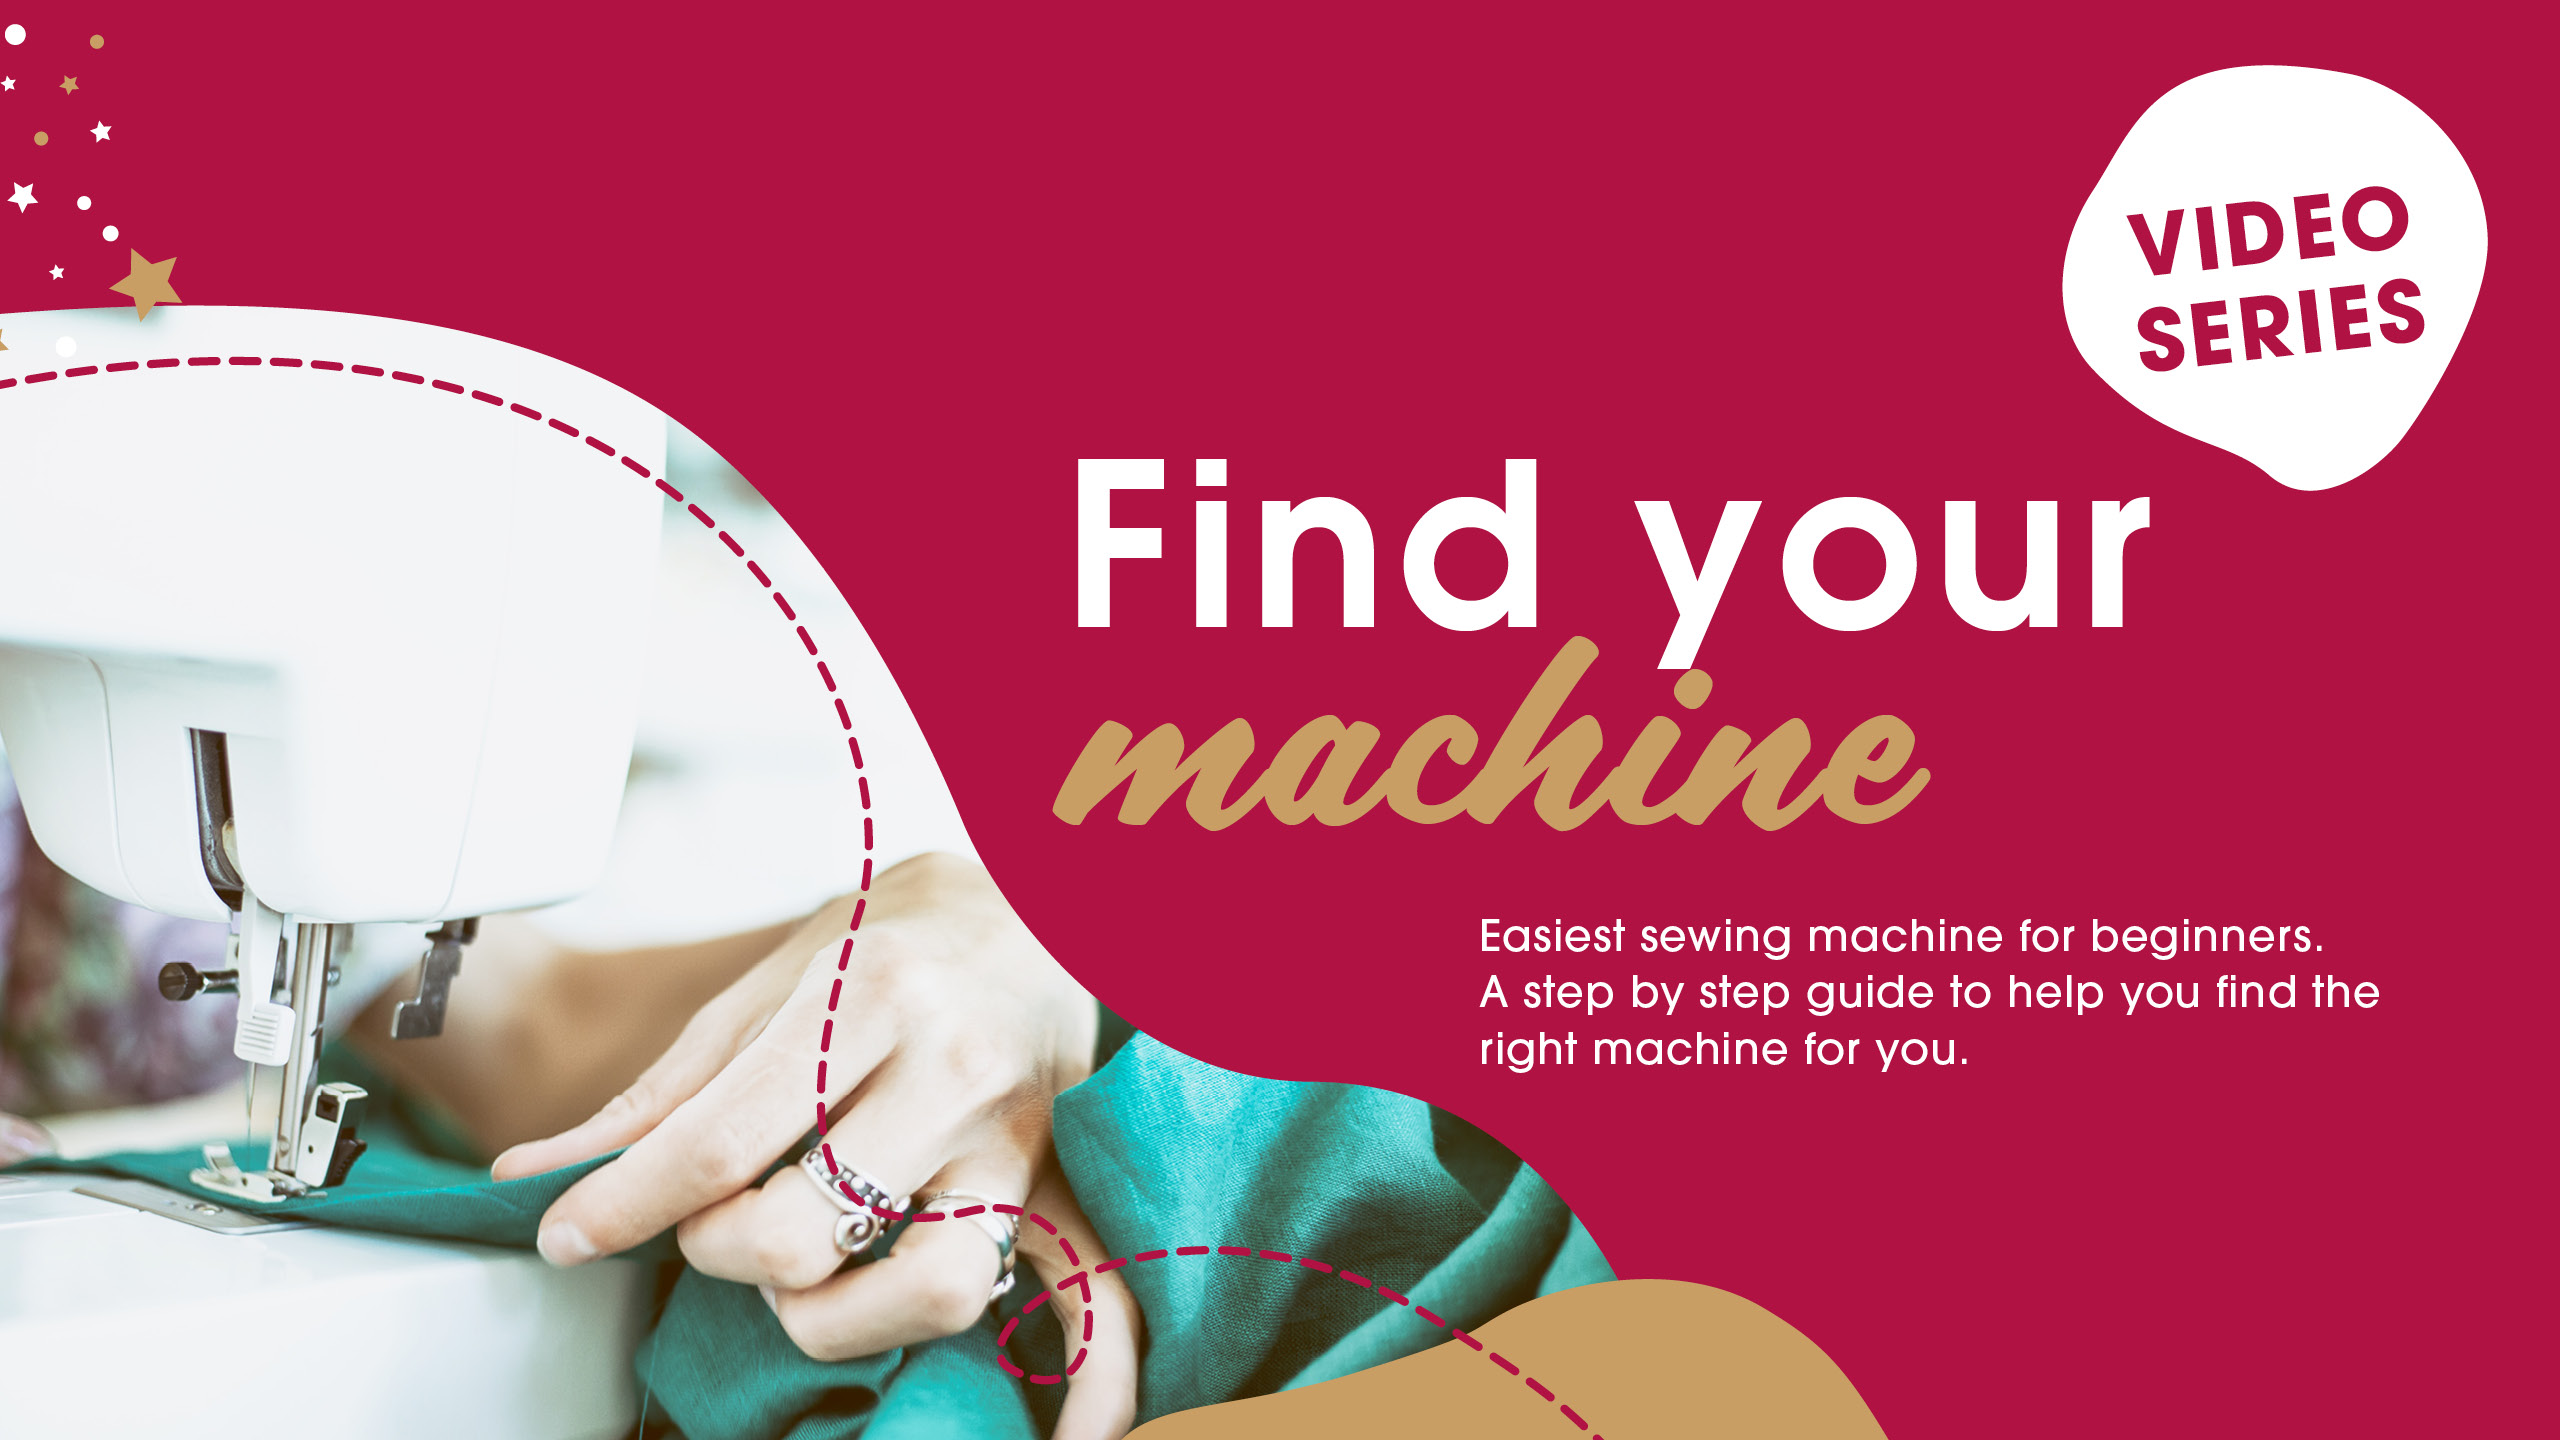 Find your sewing machine